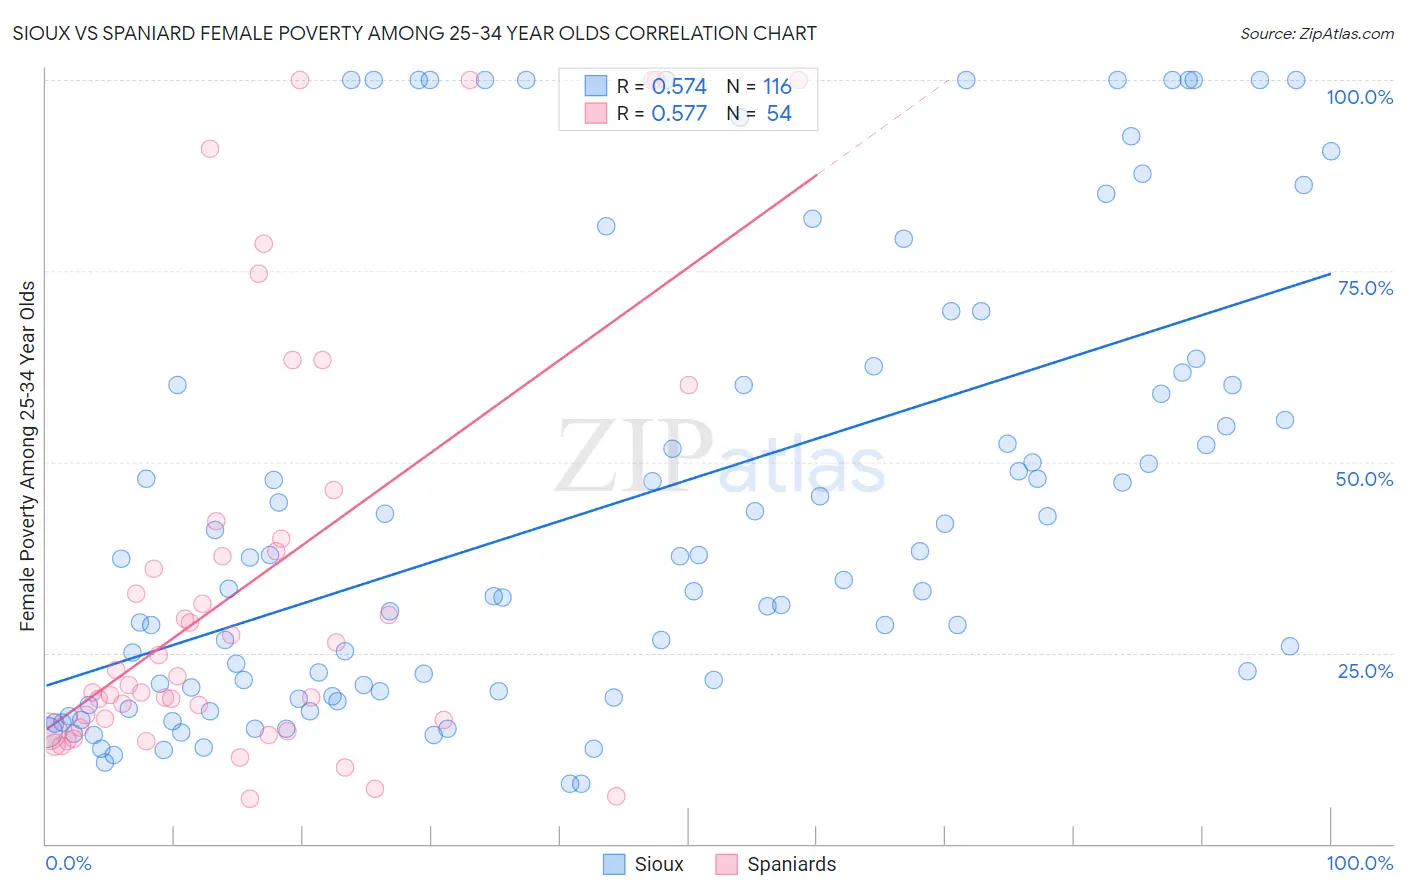 Sioux vs Spaniard Female Poverty Among 25-34 Year Olds